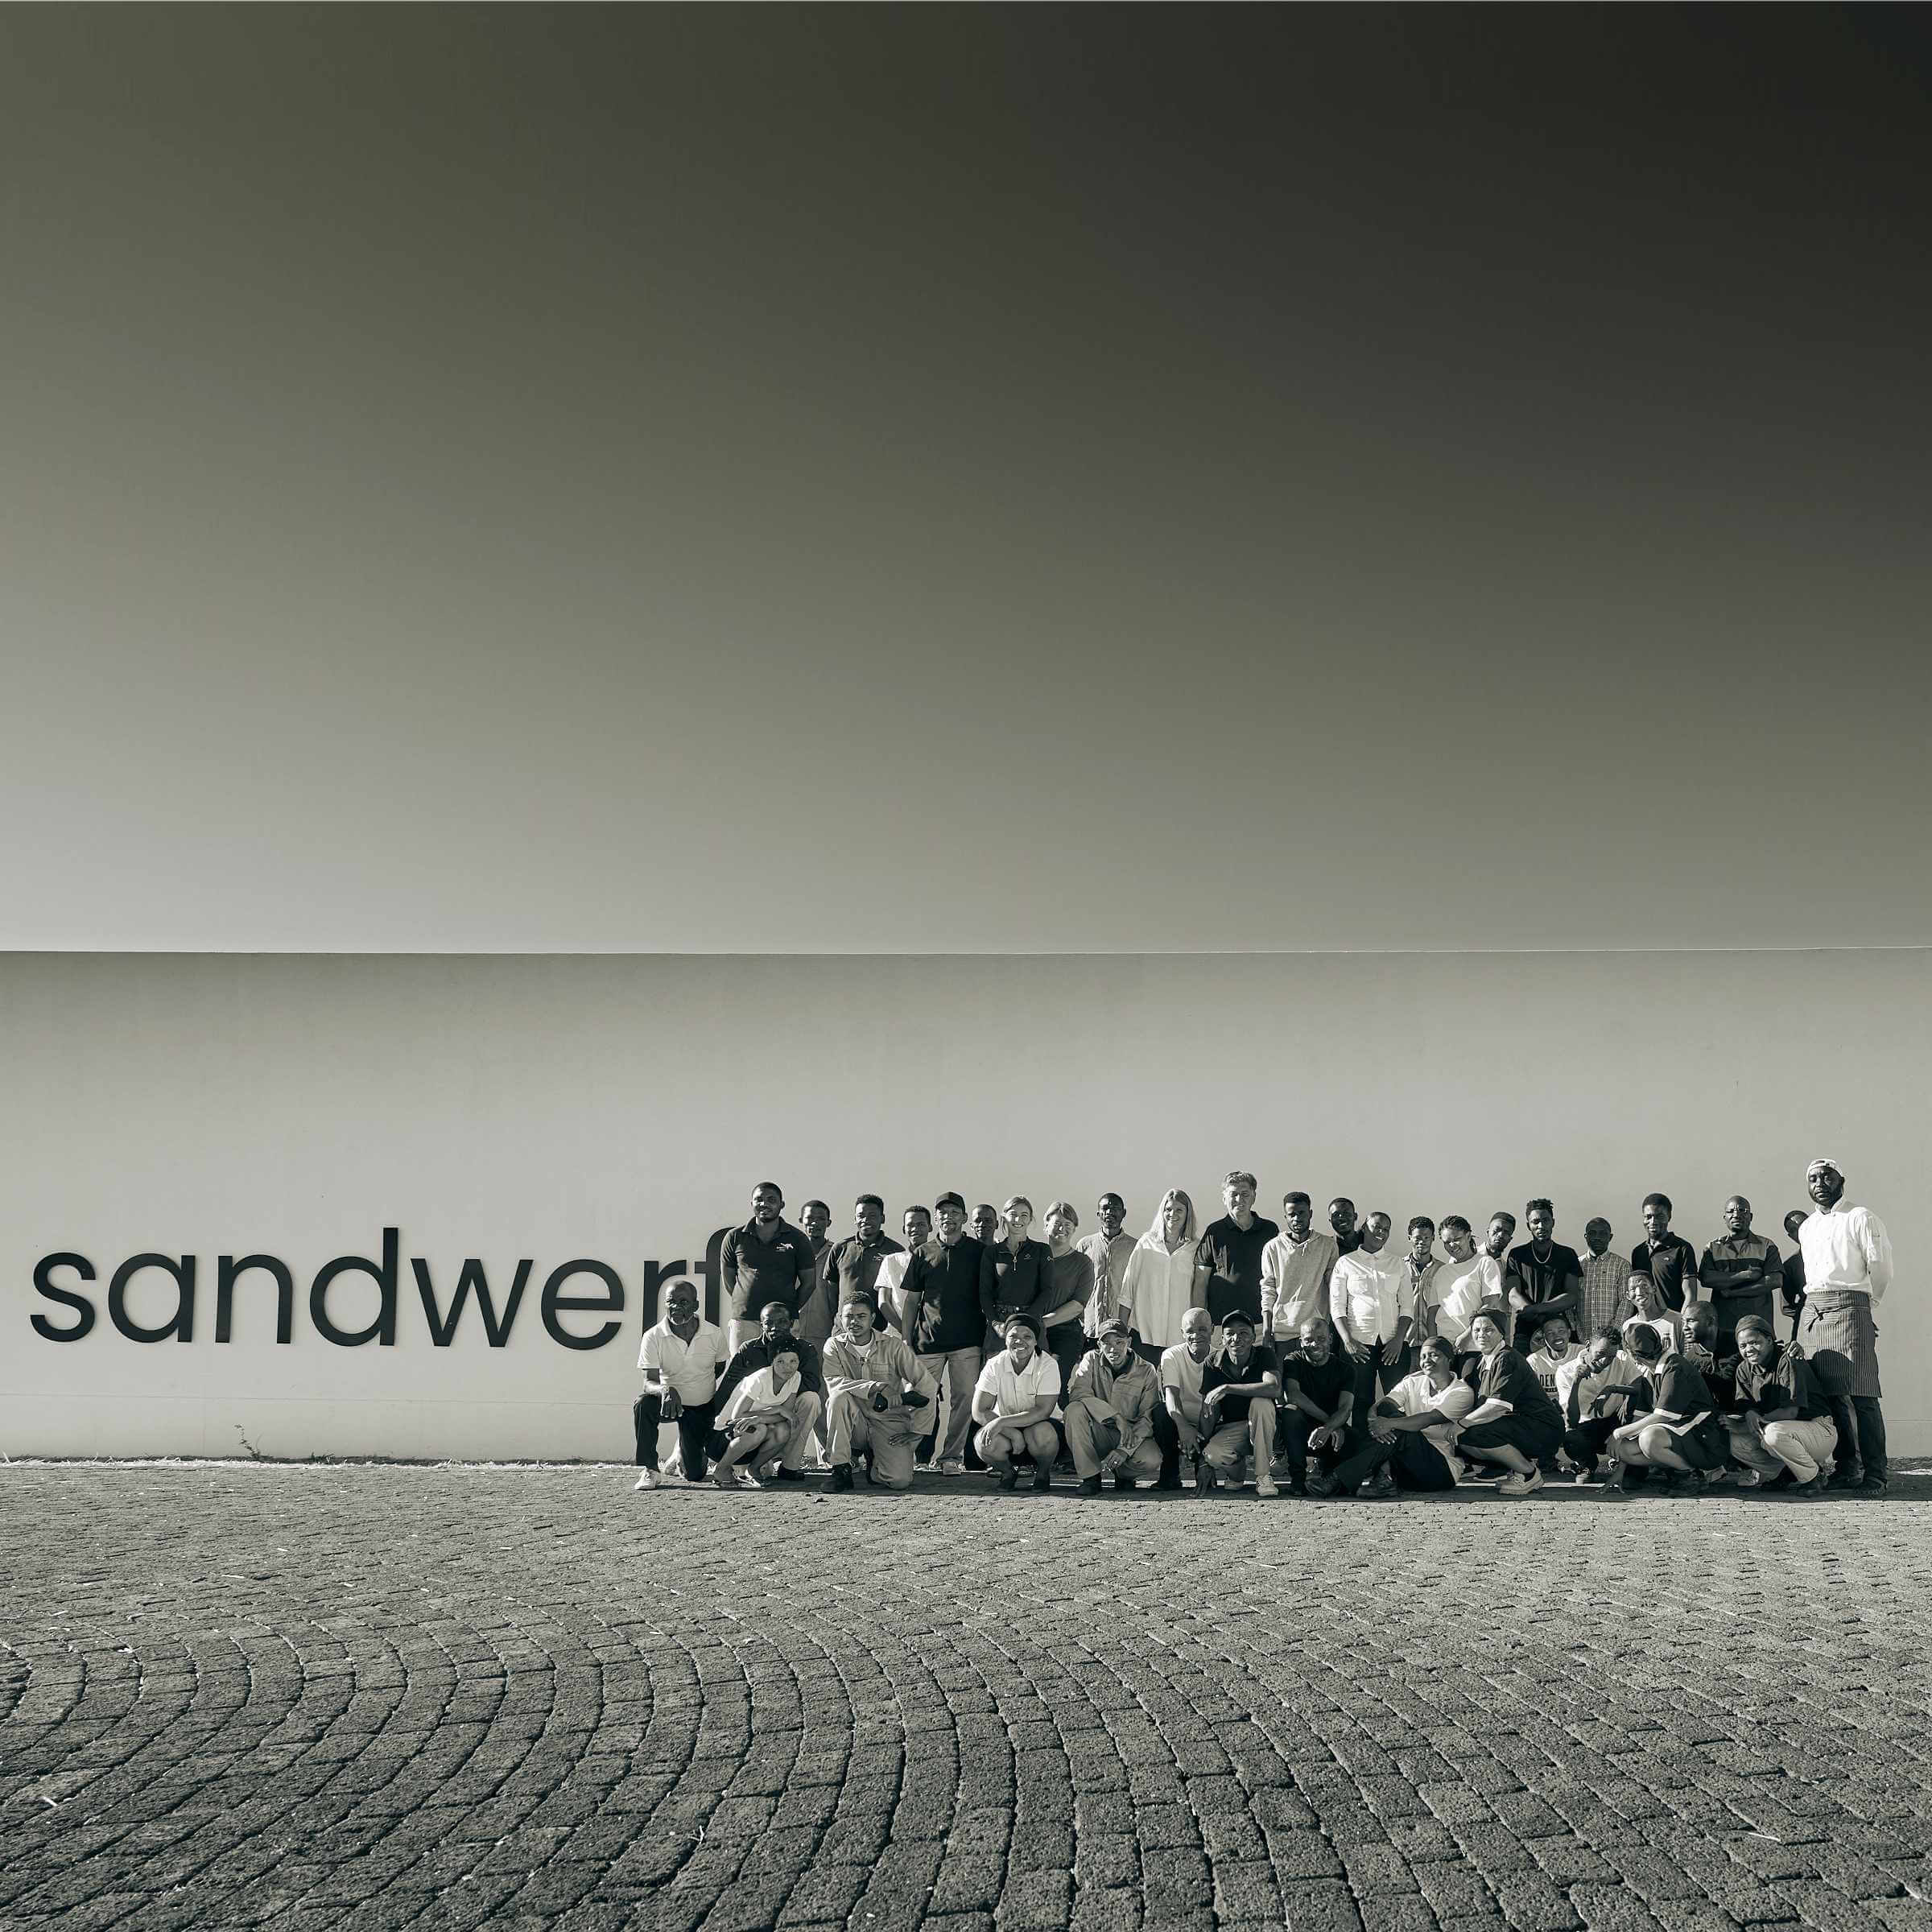 The dedicated community in front of the entrance sign of Sandwerf.